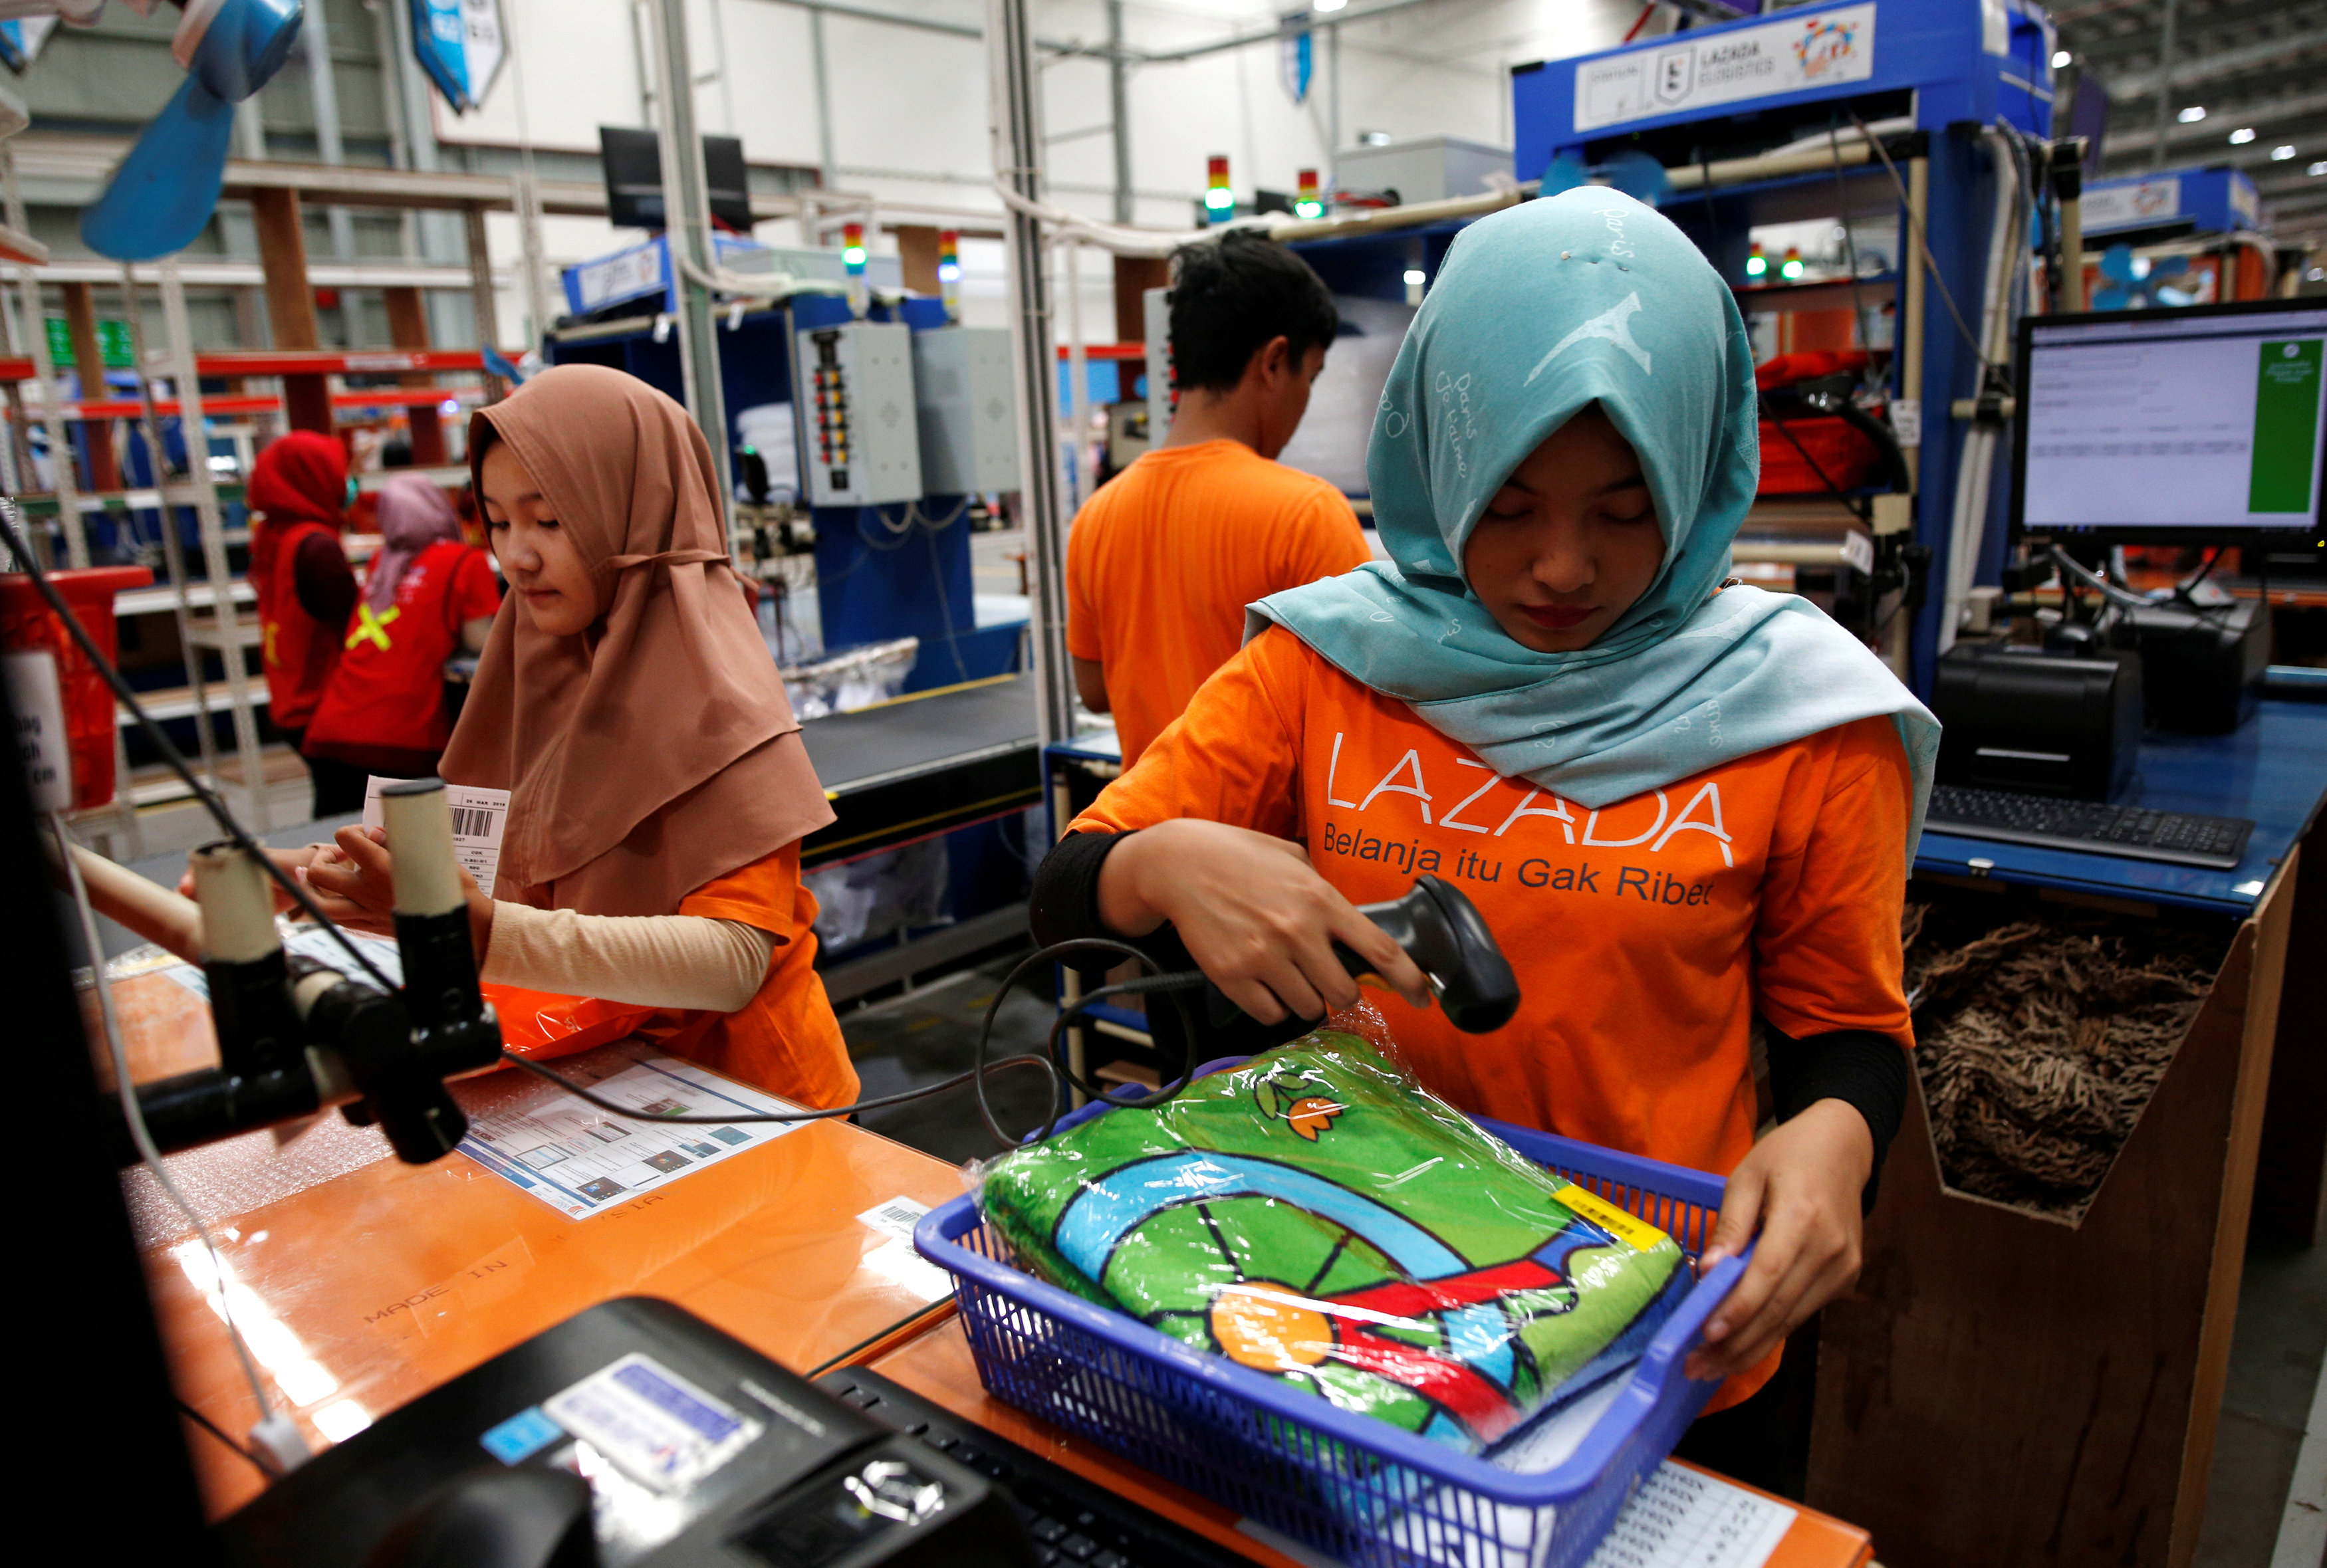 China tech giants bet on untangling logistics of Indonesian e-commerce